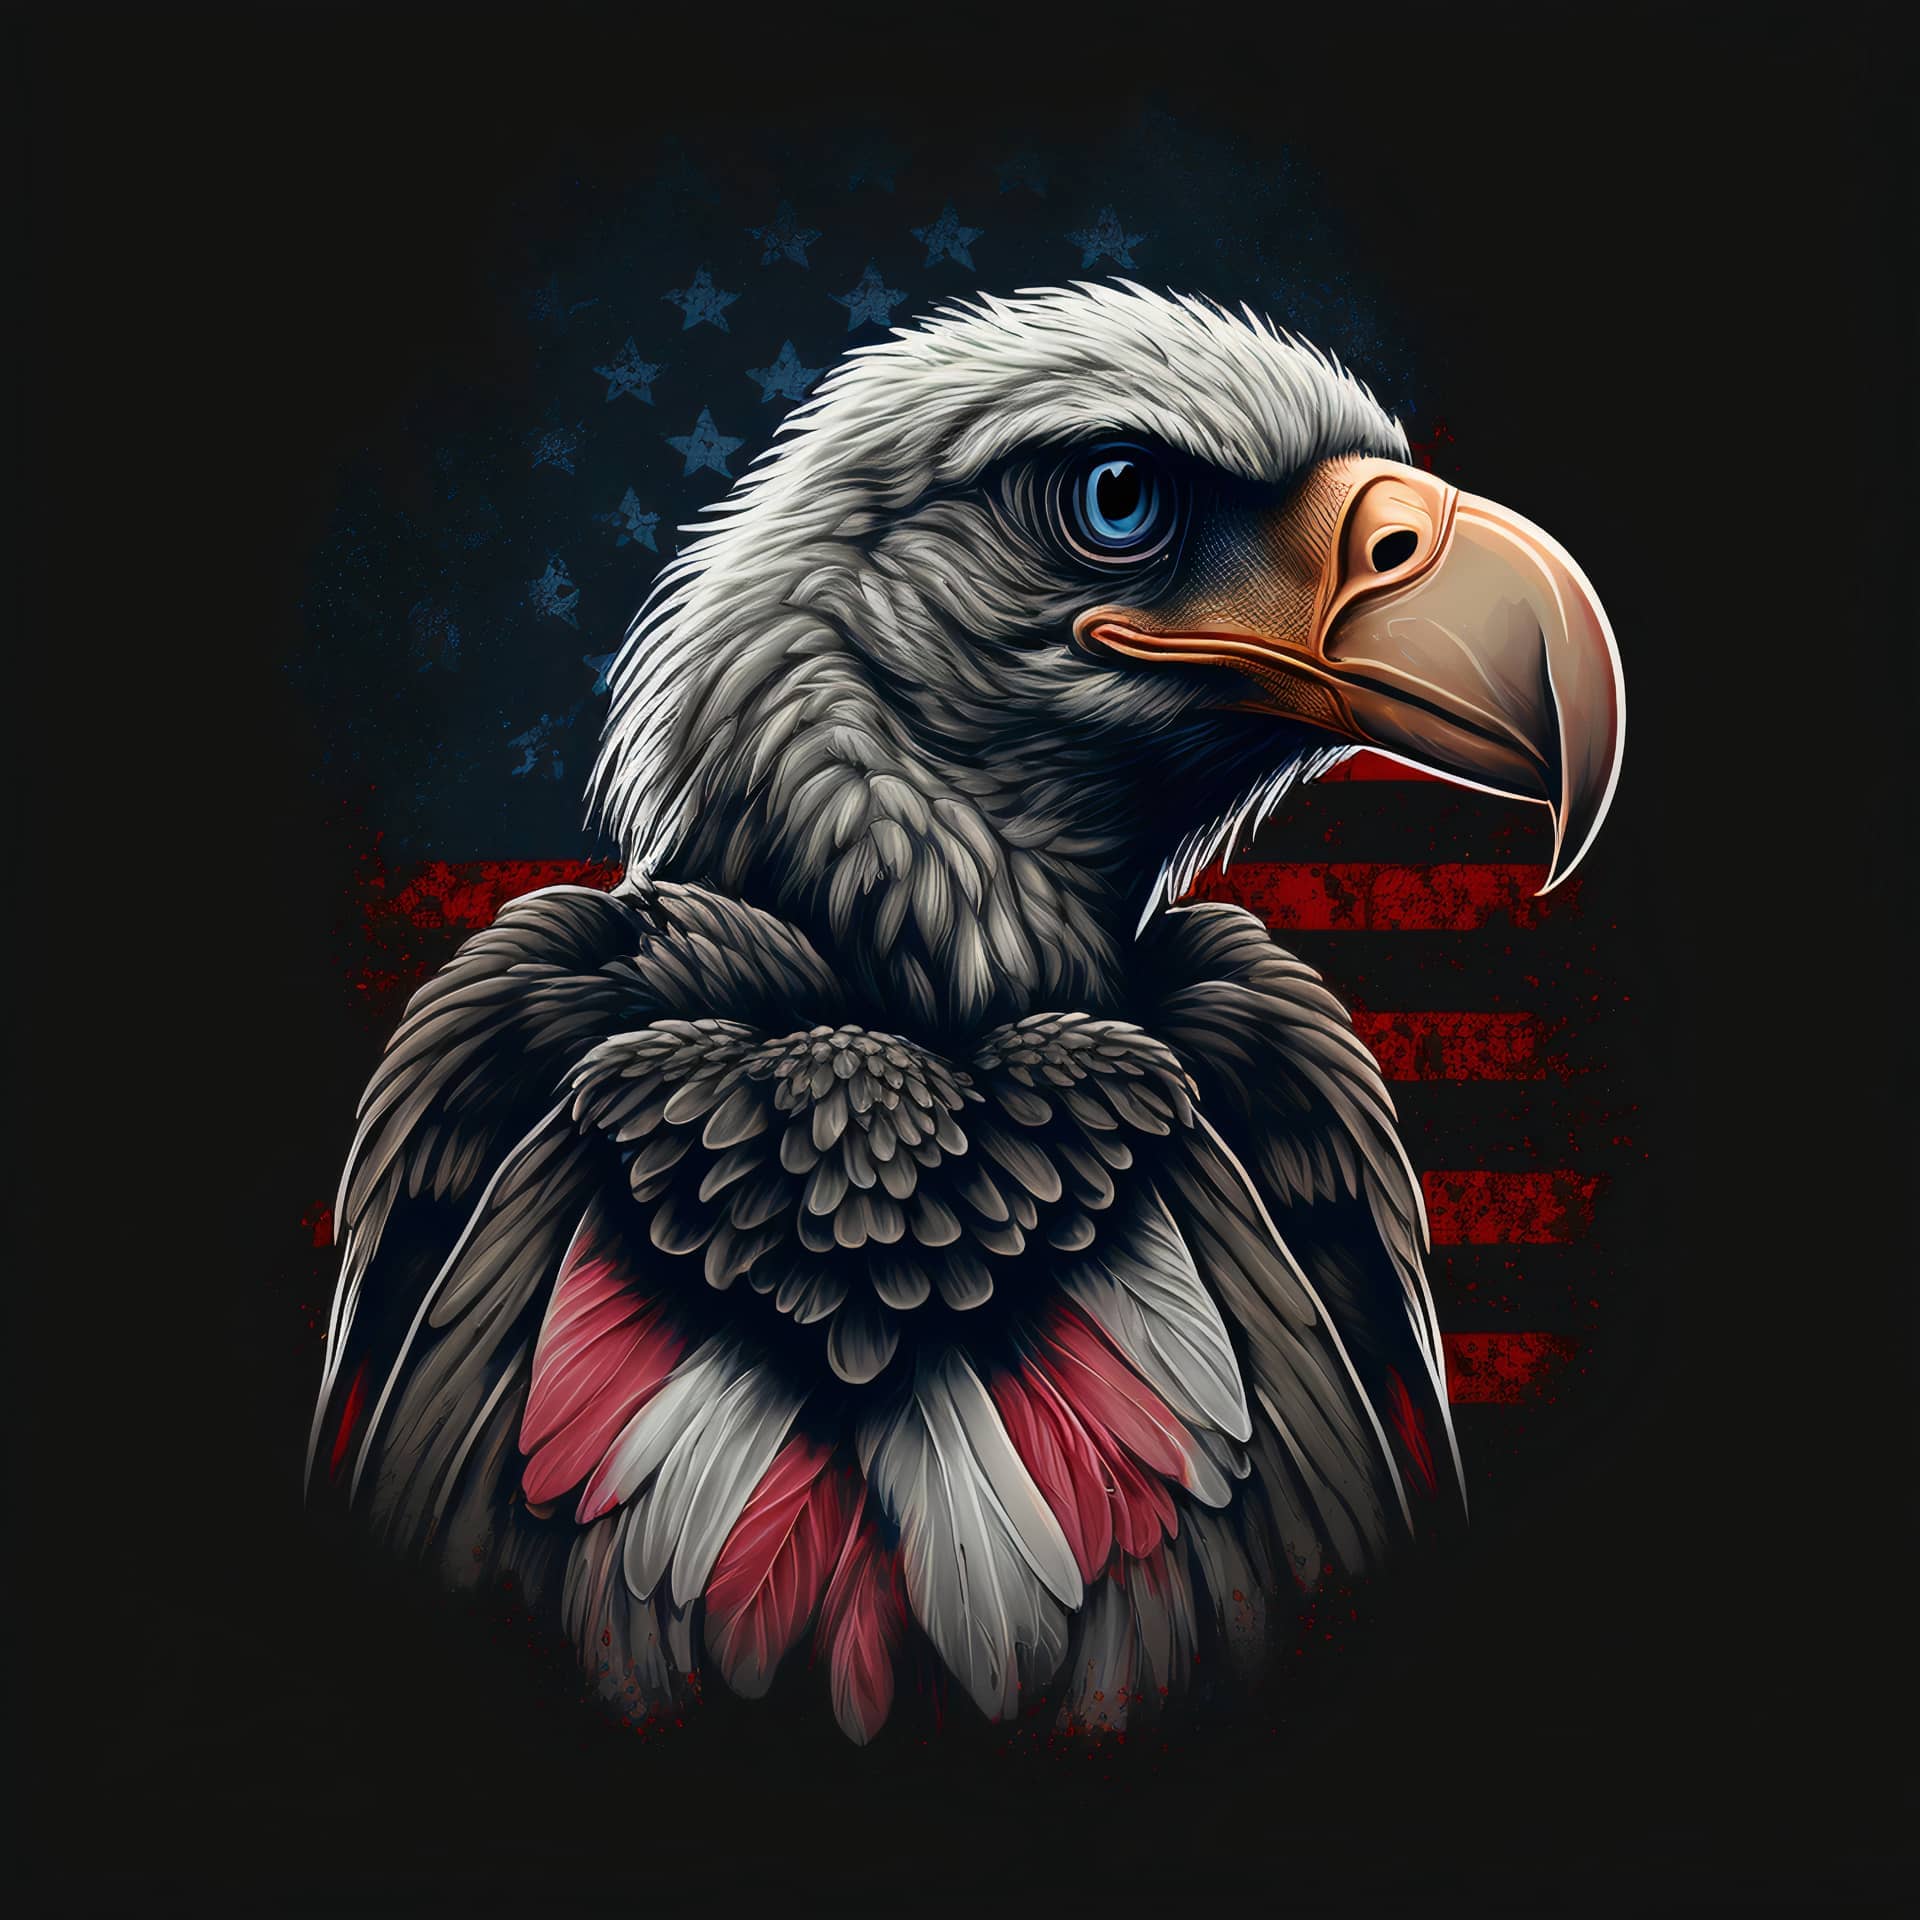 Vulture design with american flag